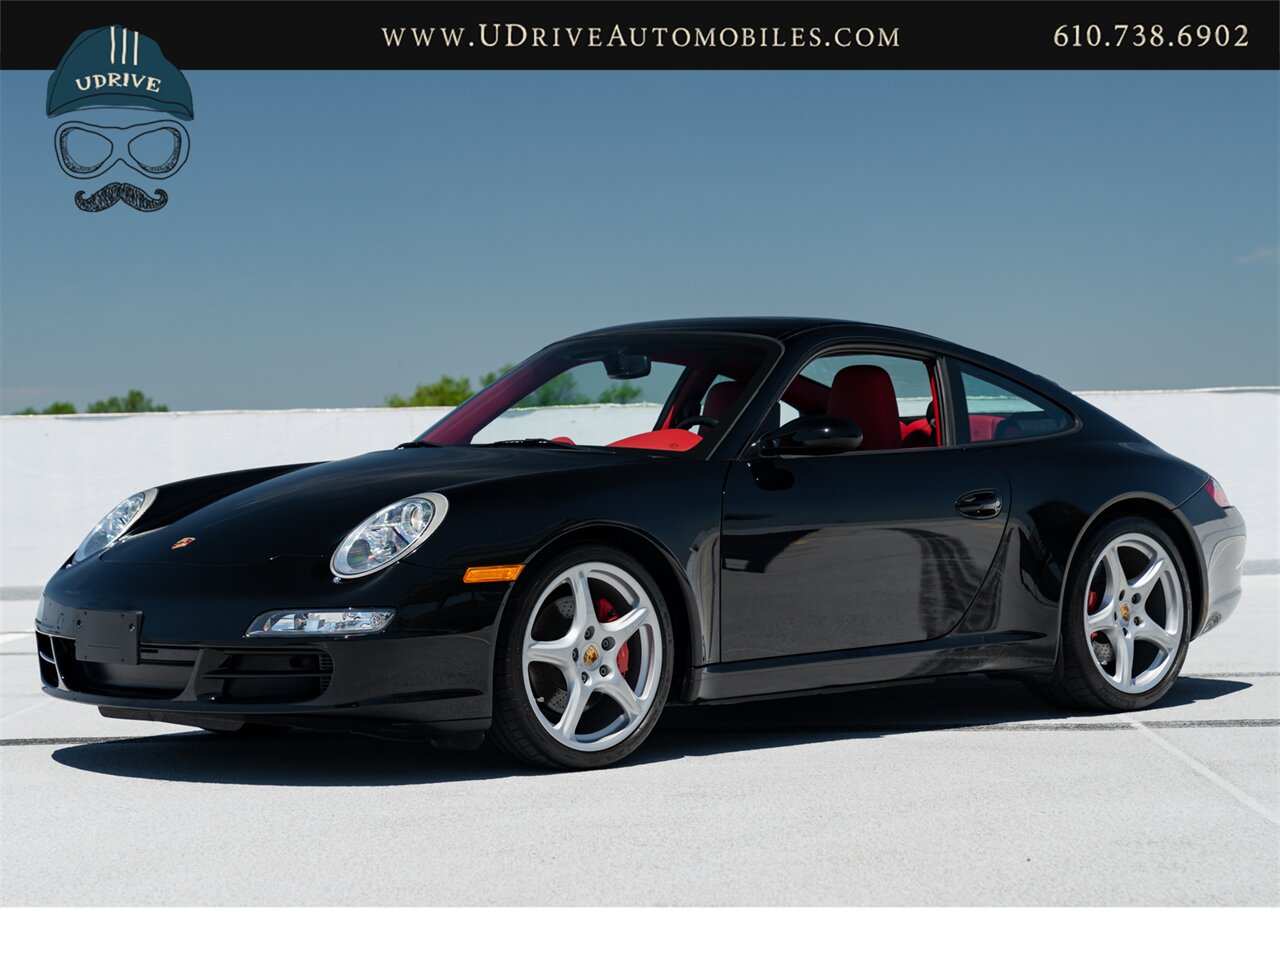 2005 Porsche 911 Carrera 911S 997 6 Speed 13k Miles Chrono  Leather to Sample Boxster Red/Blk Service History - Photo 11 - West Chester, PA 19382